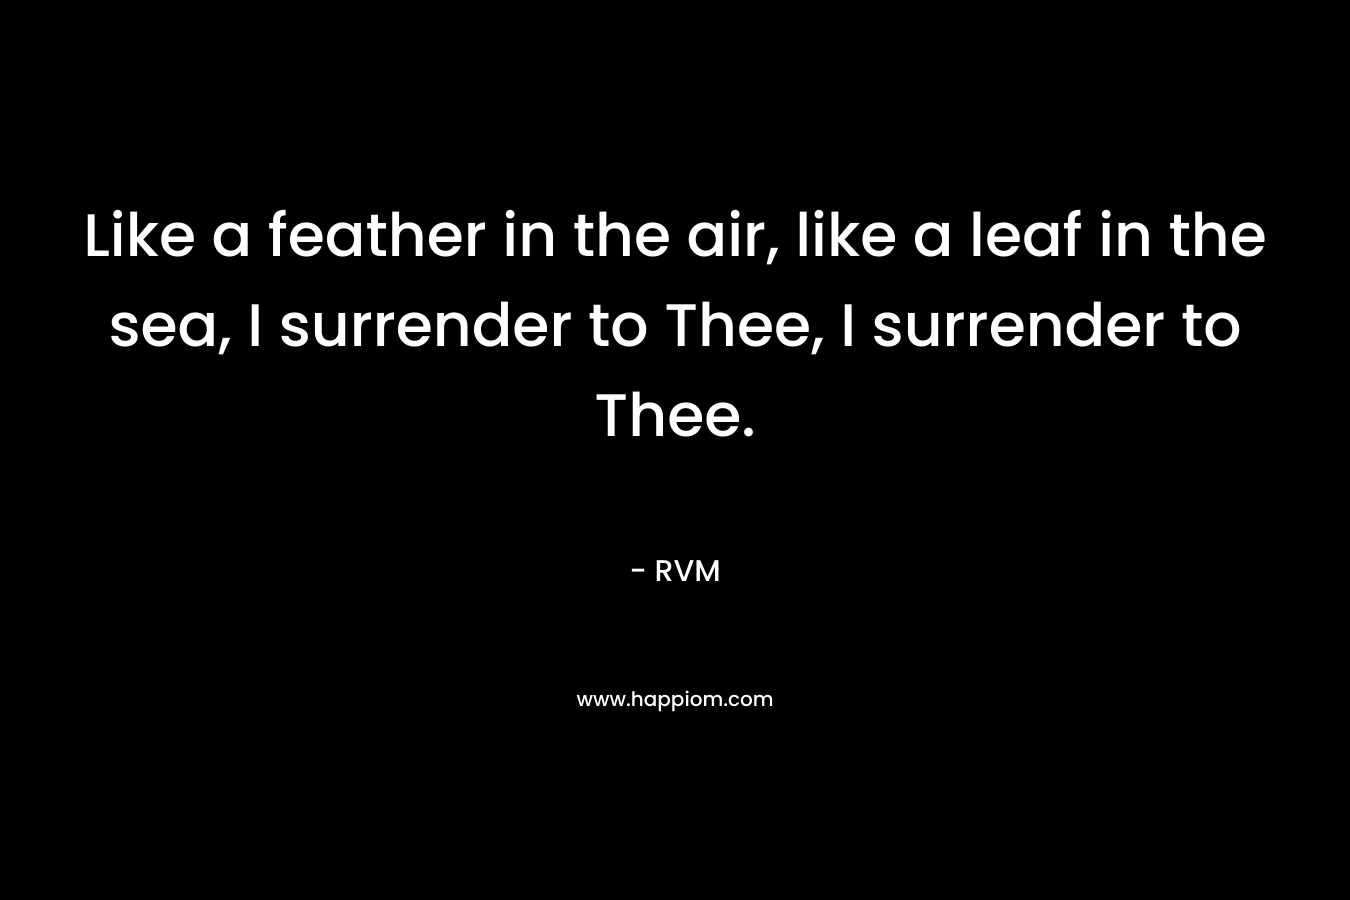 Like a feather in the air, like a leaf in the sea, I surrender to Thee, I surrender to Thee.